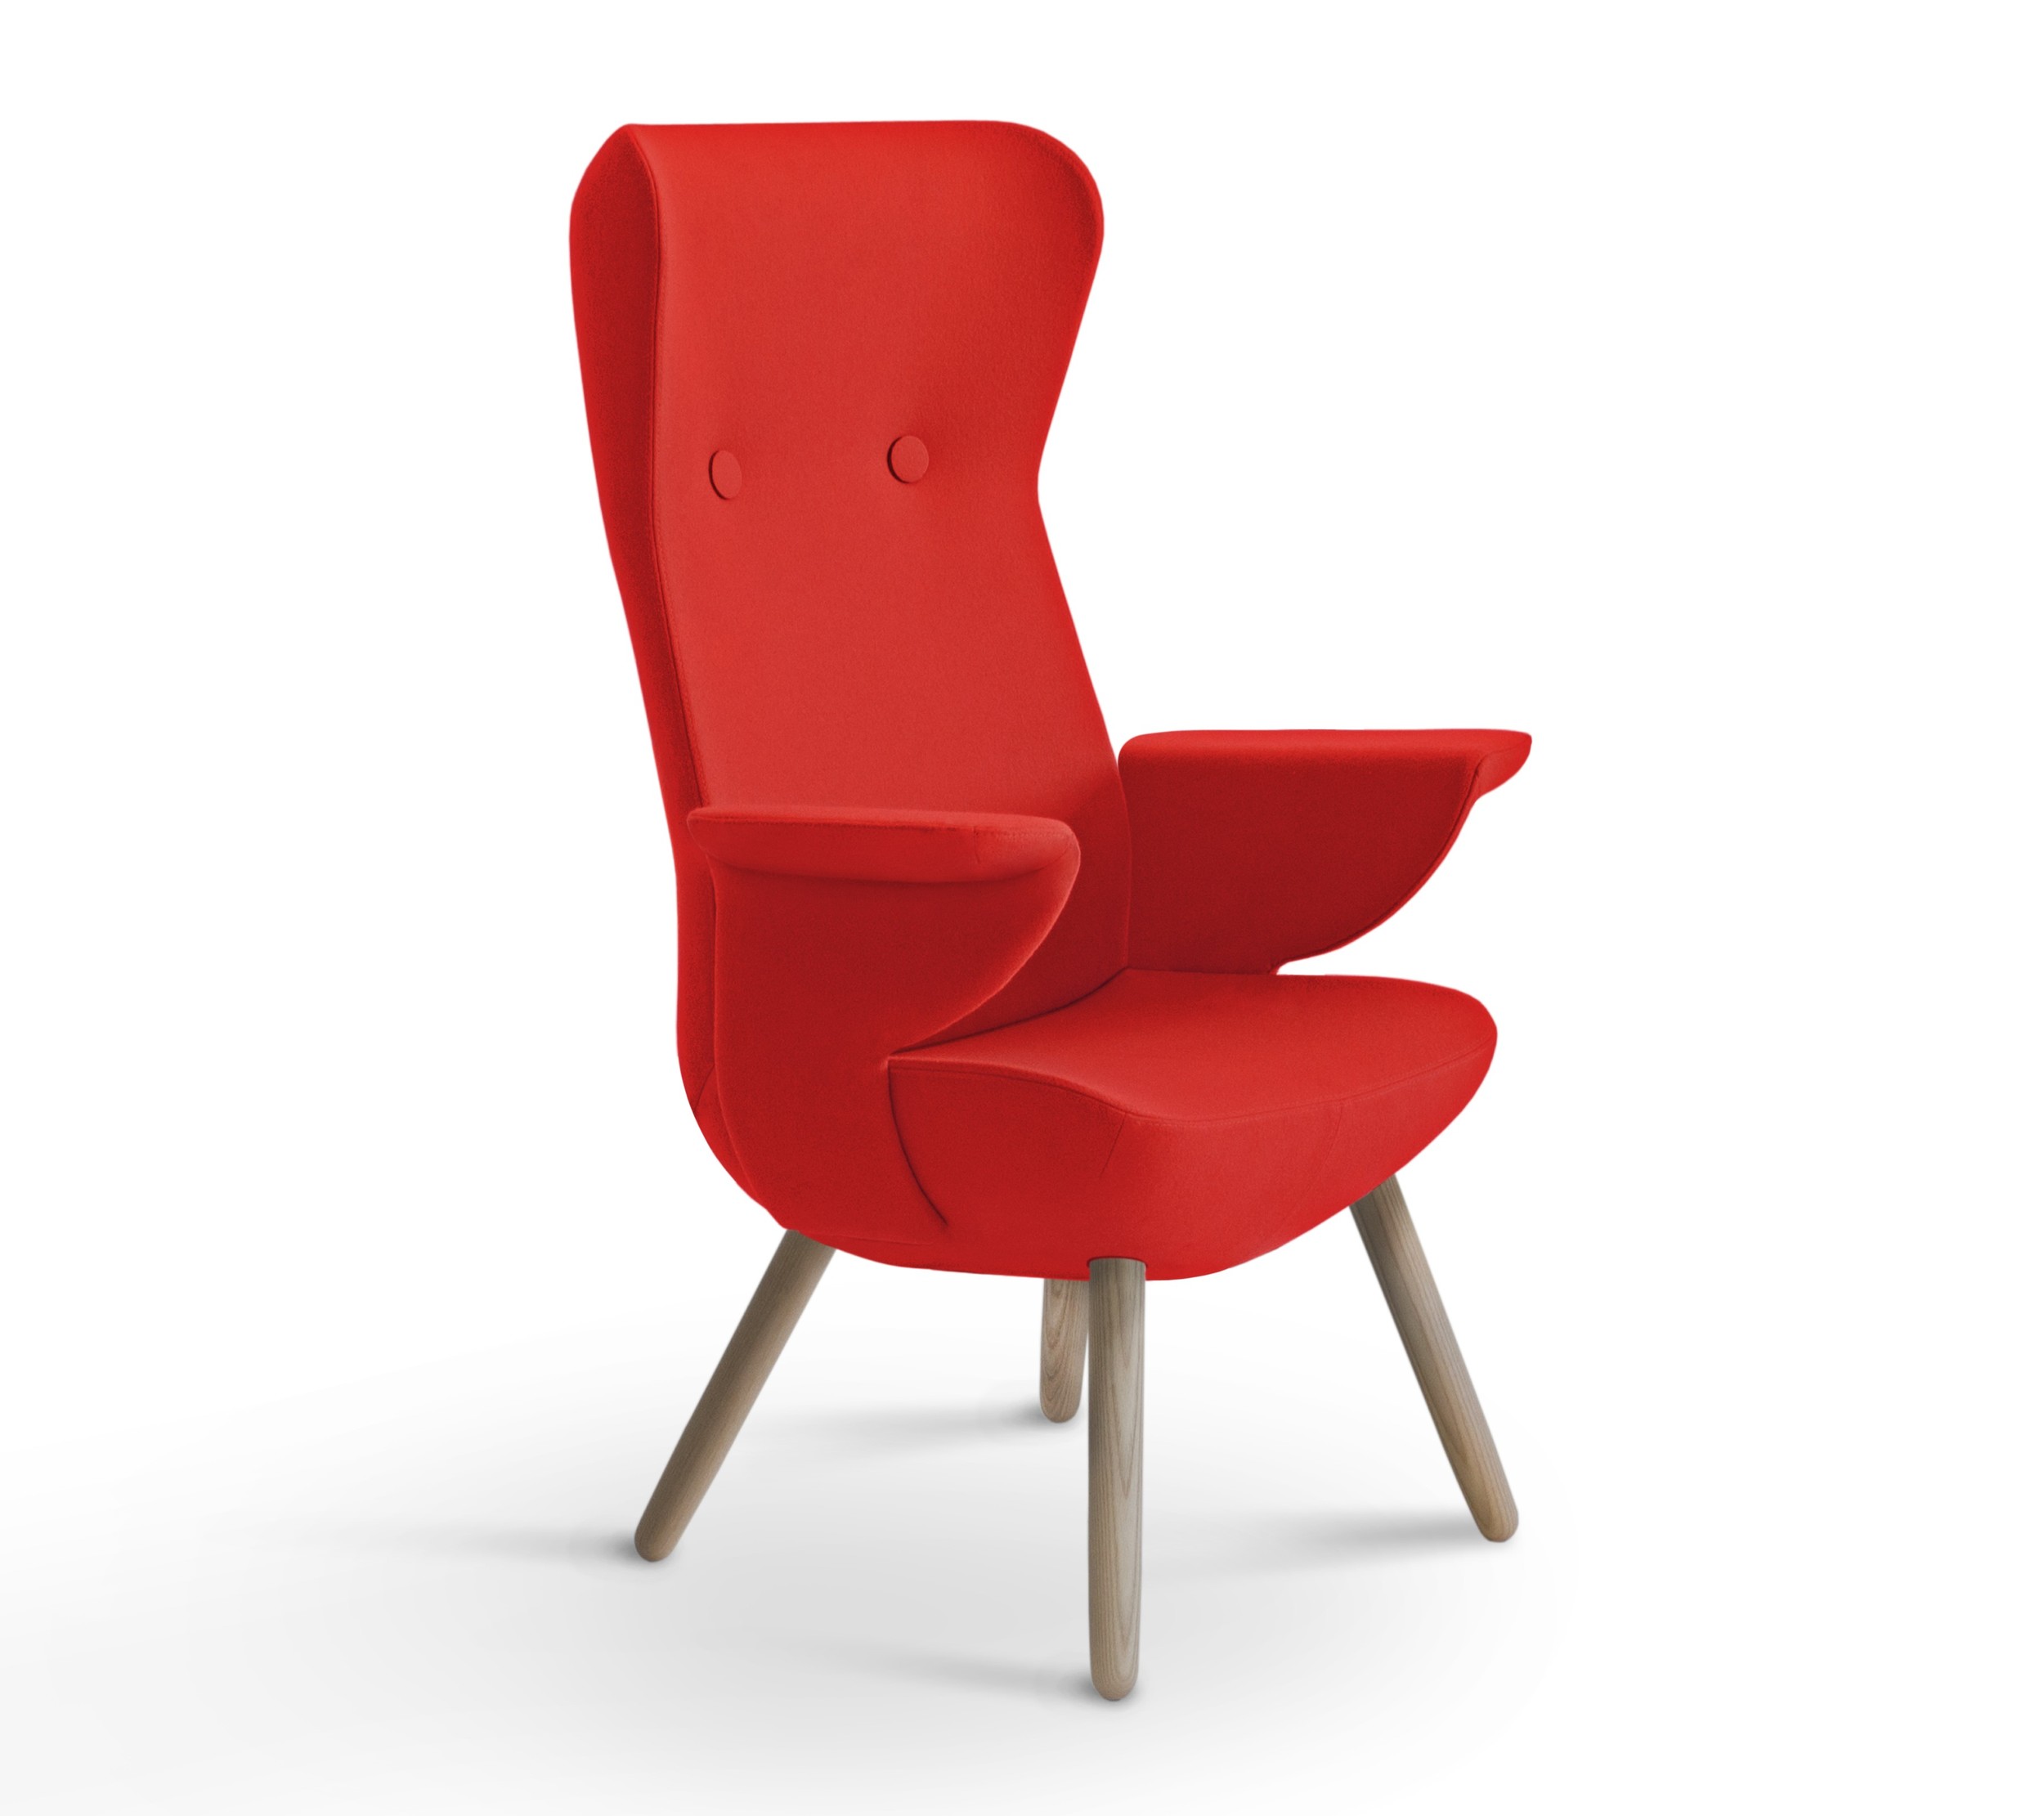 Edith Chair by Kenneth Grange for Hitch Mylius 03.jpg